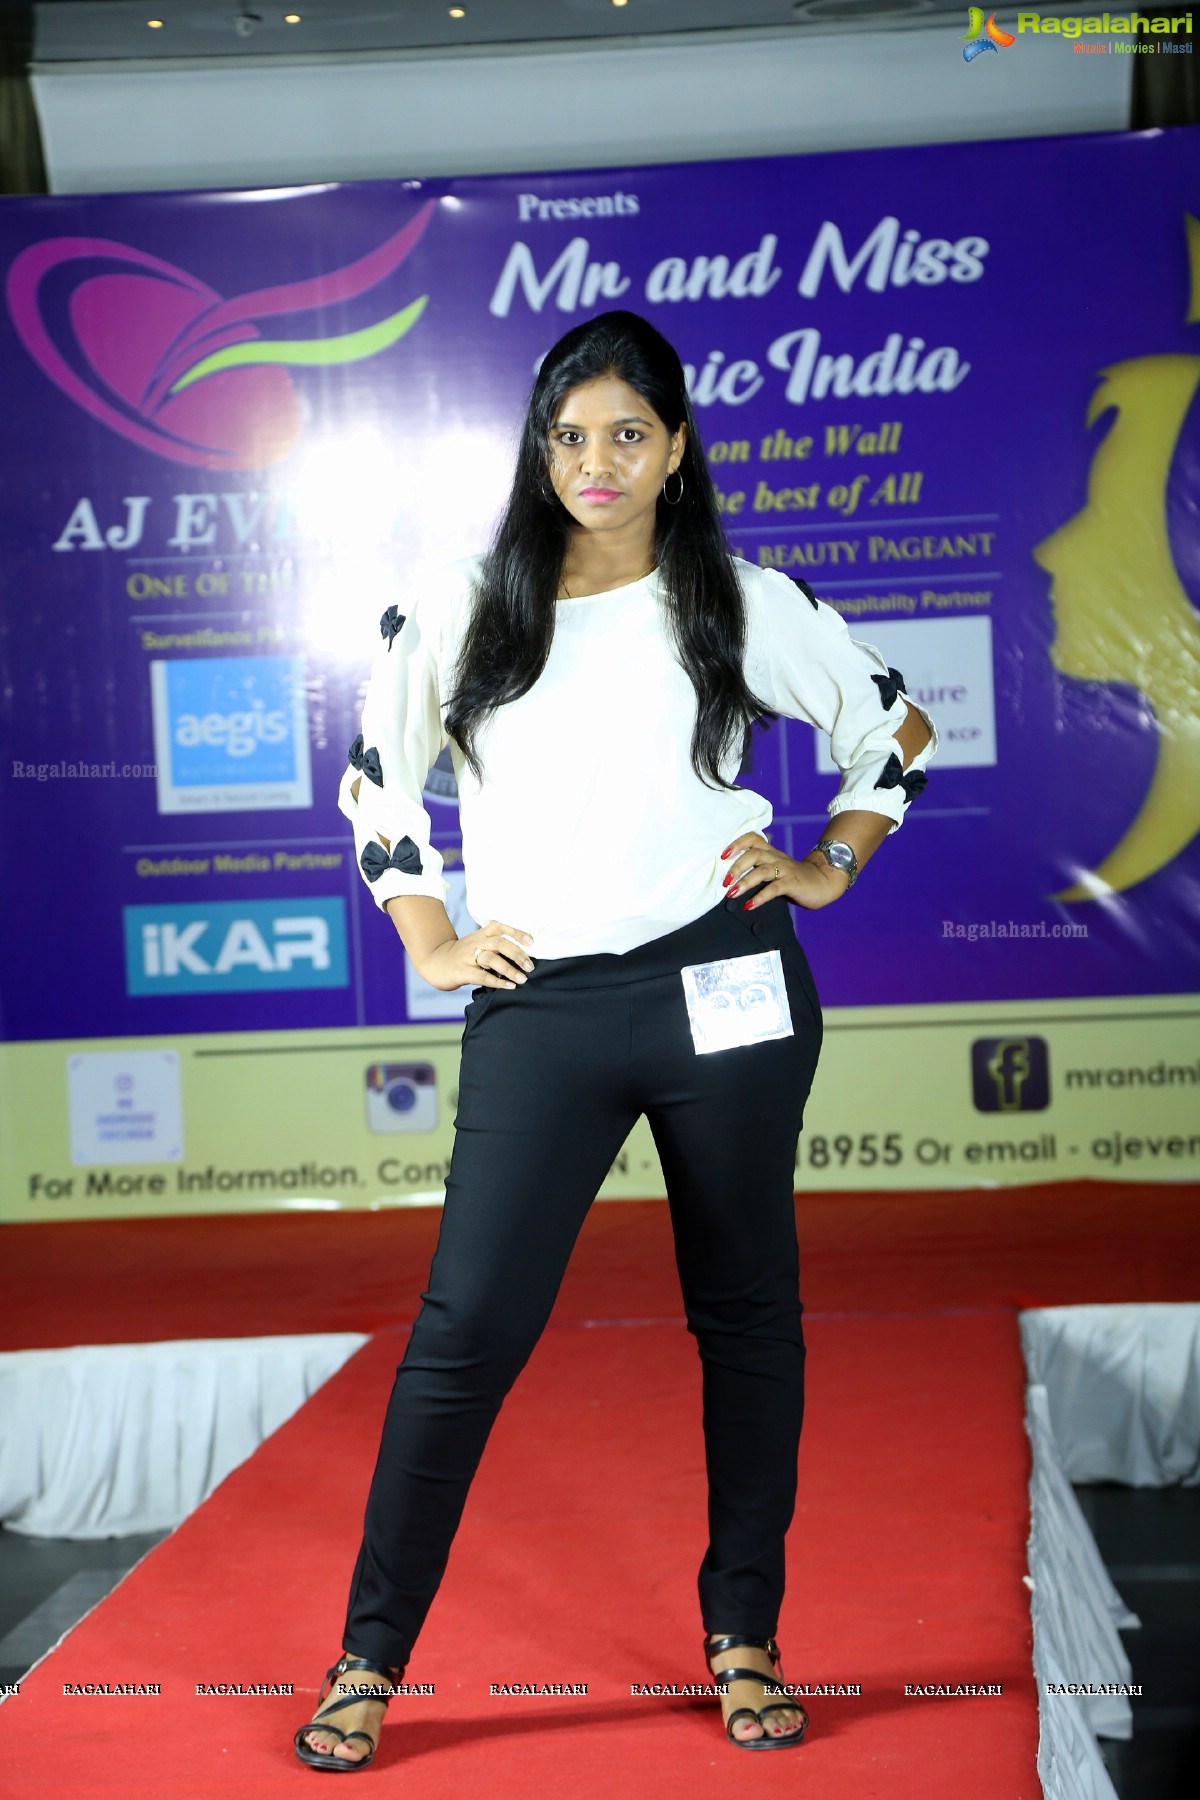 AJ Events Presents Mr and Miss Iconic India @ Mercure